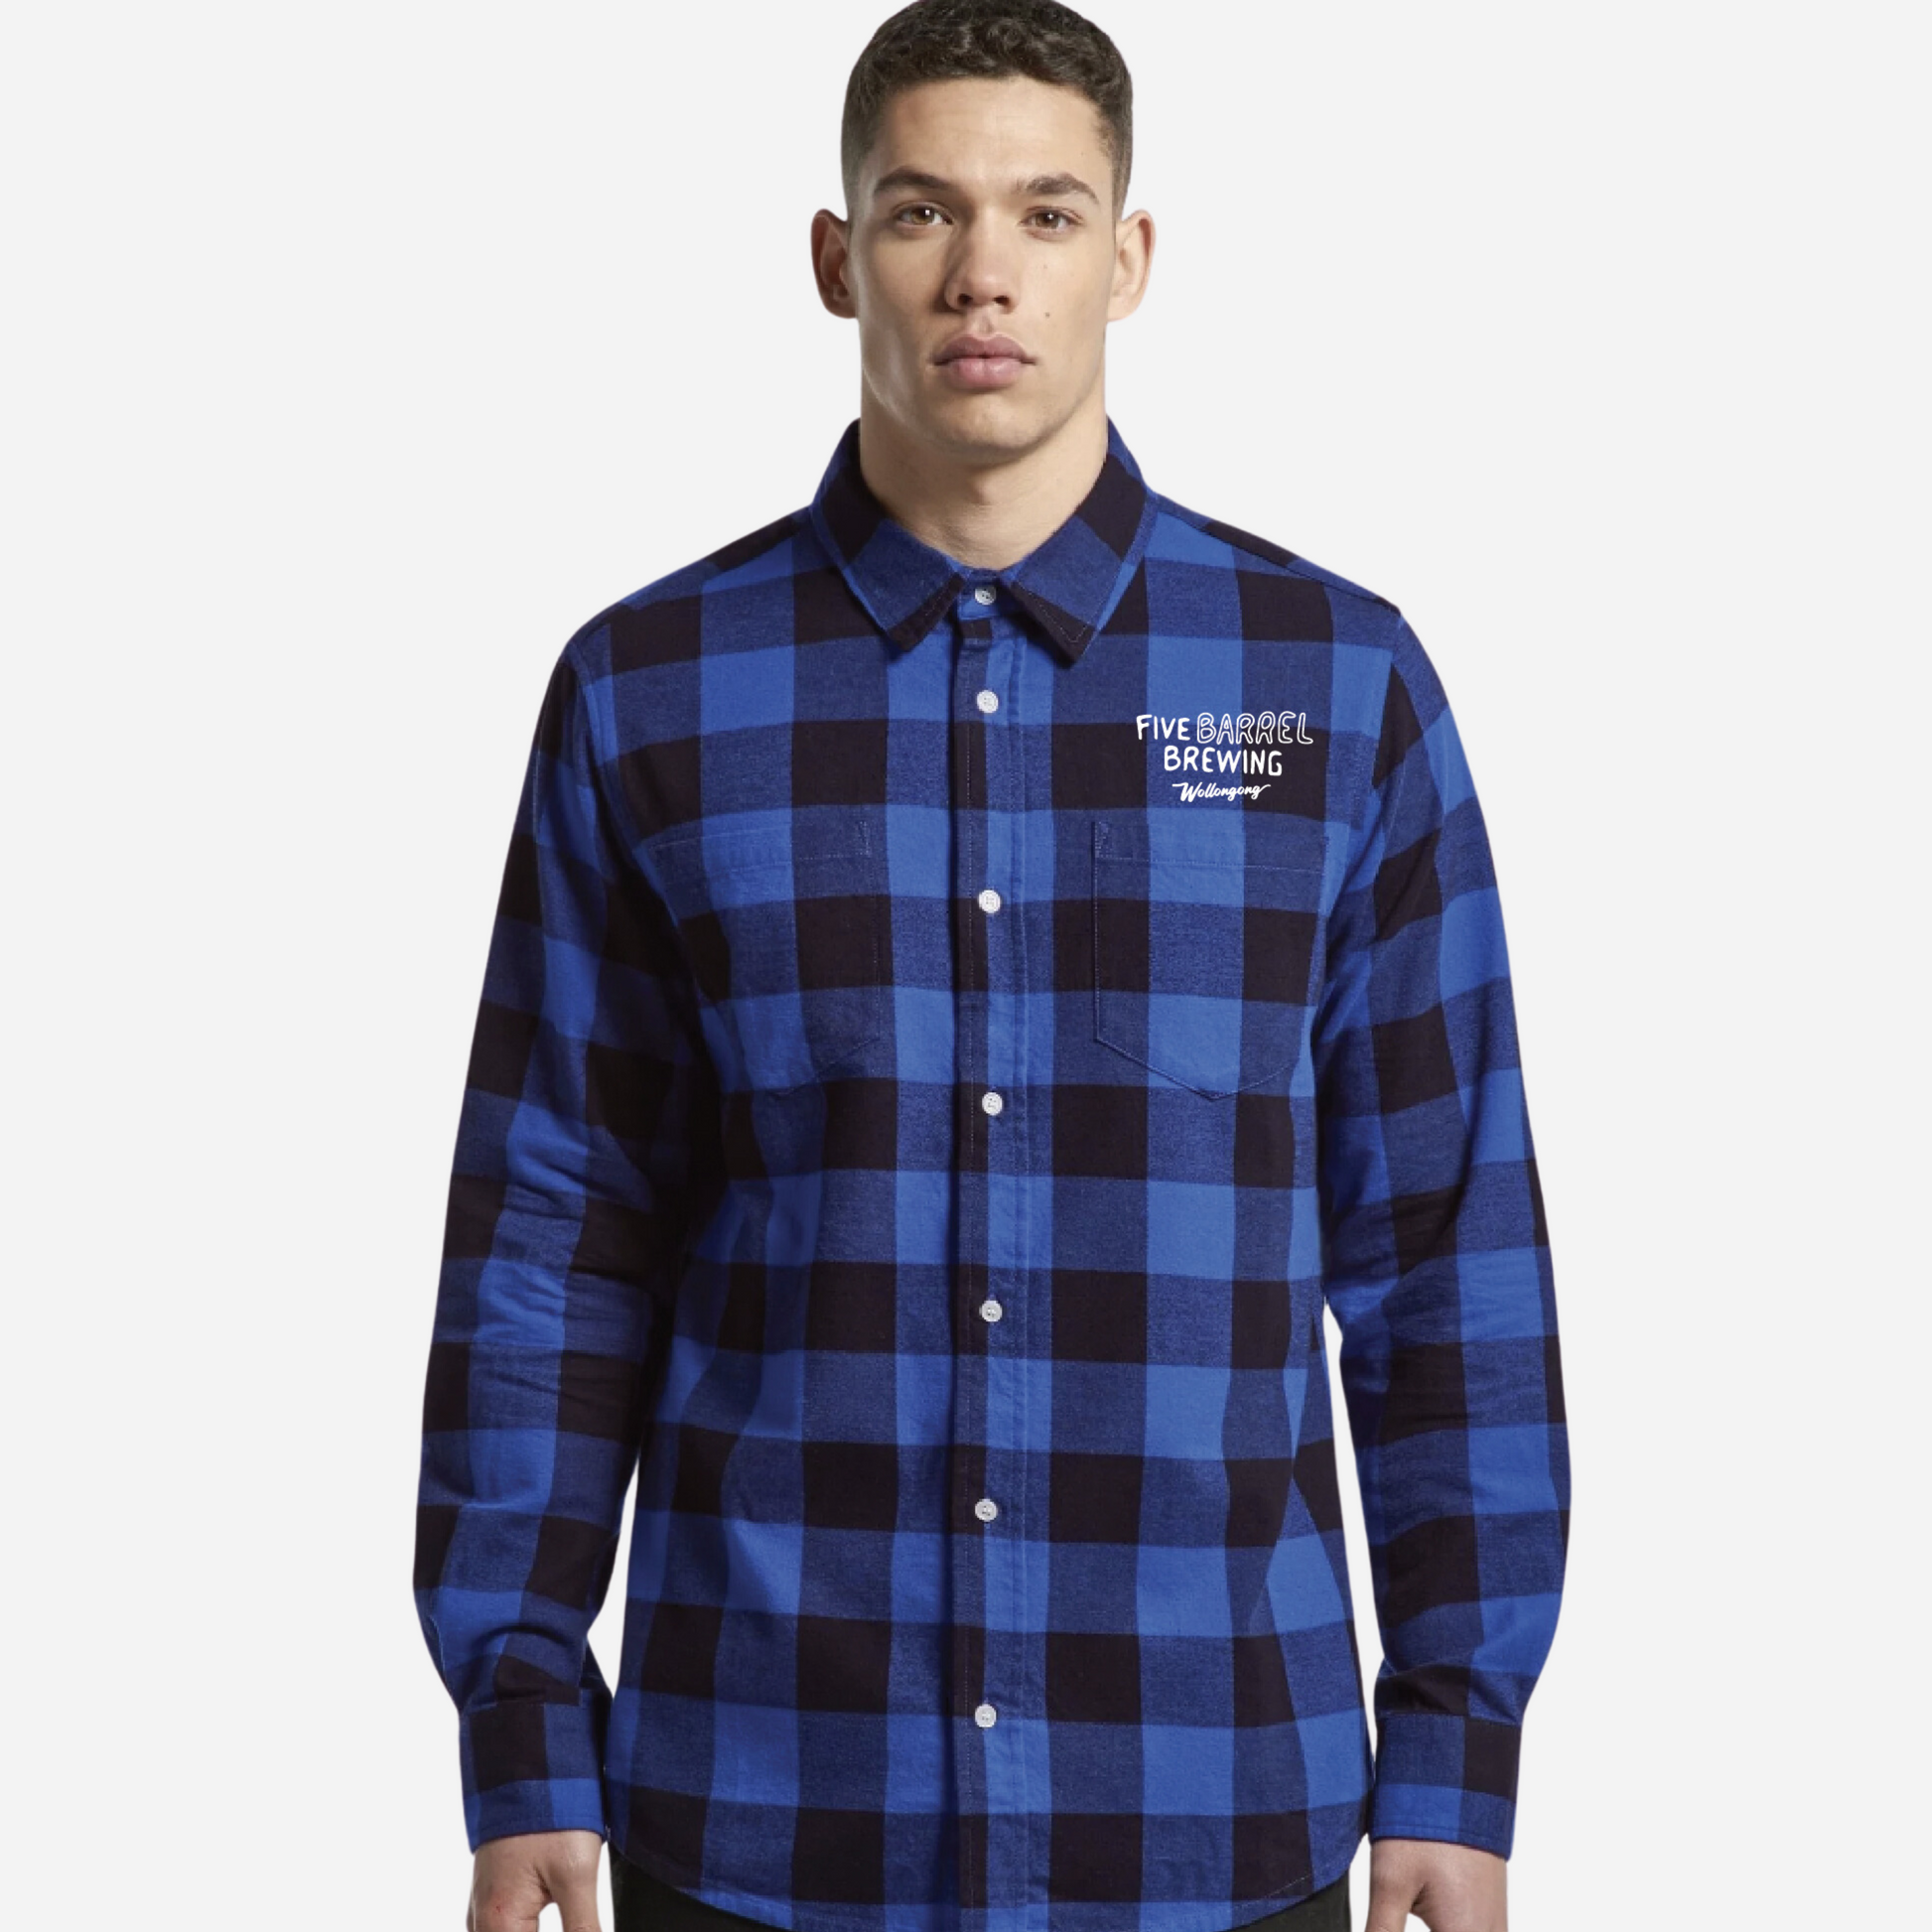 Five Barrel Brewing embroidered Blue Flannel